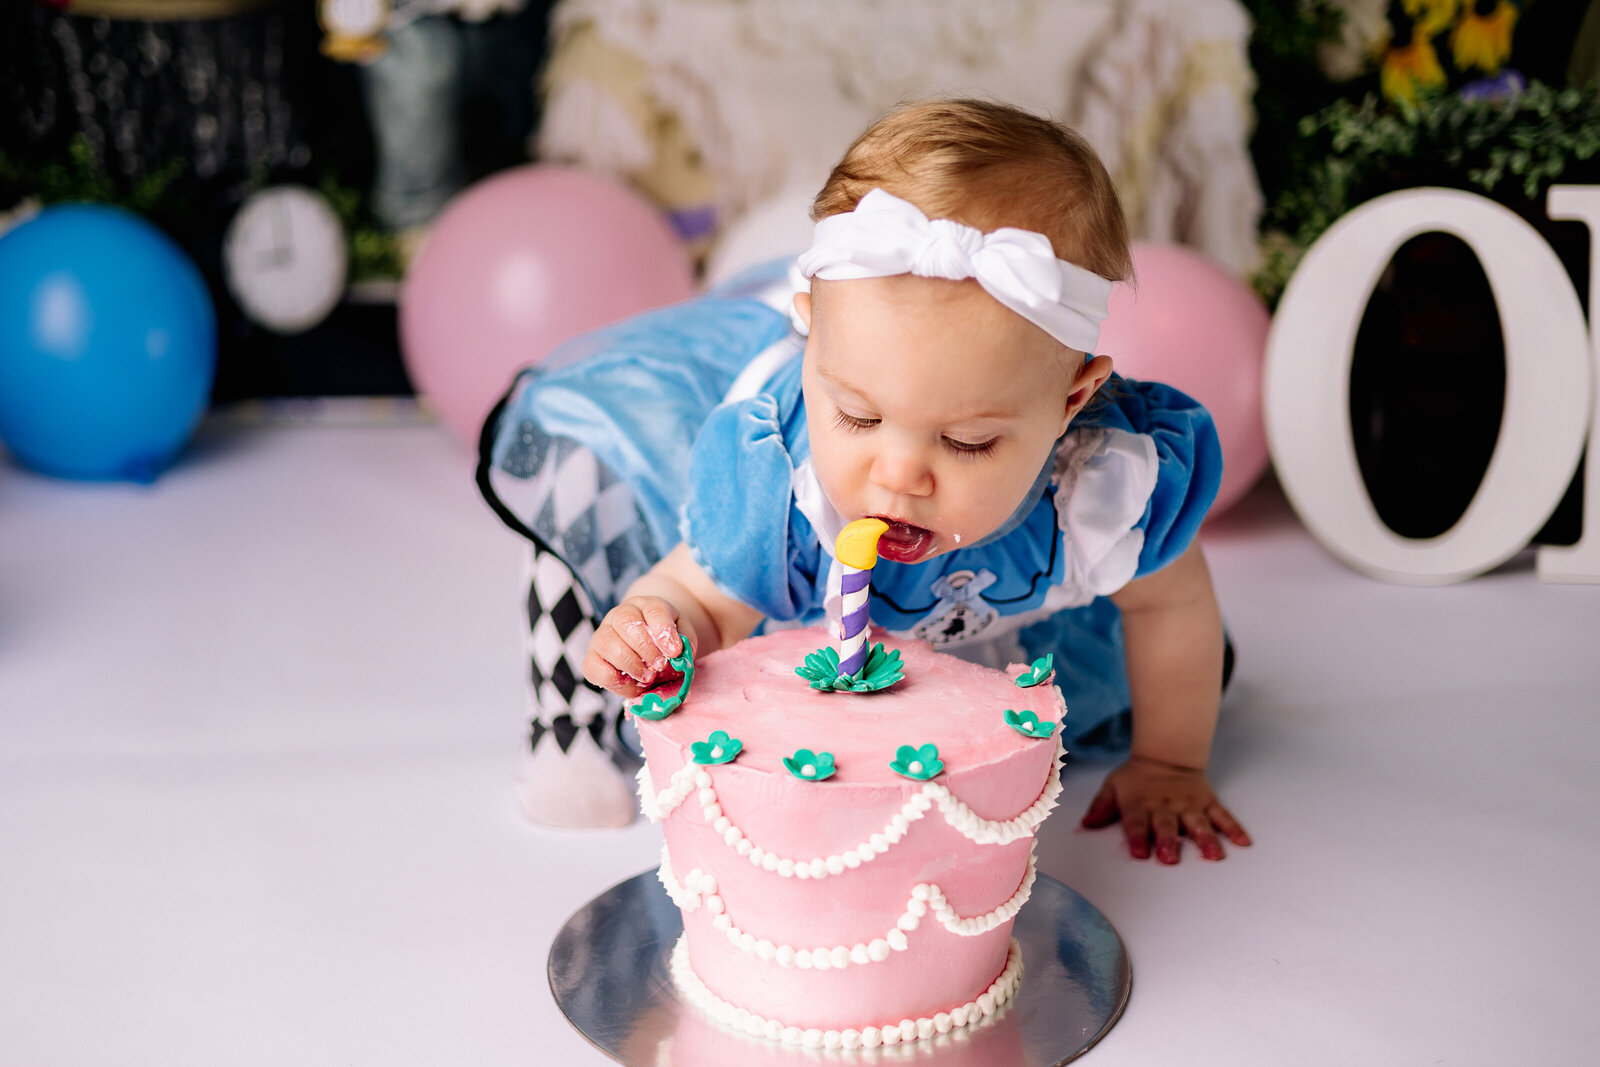 Sweet baby girl leans in to take her first taste of birthday cake